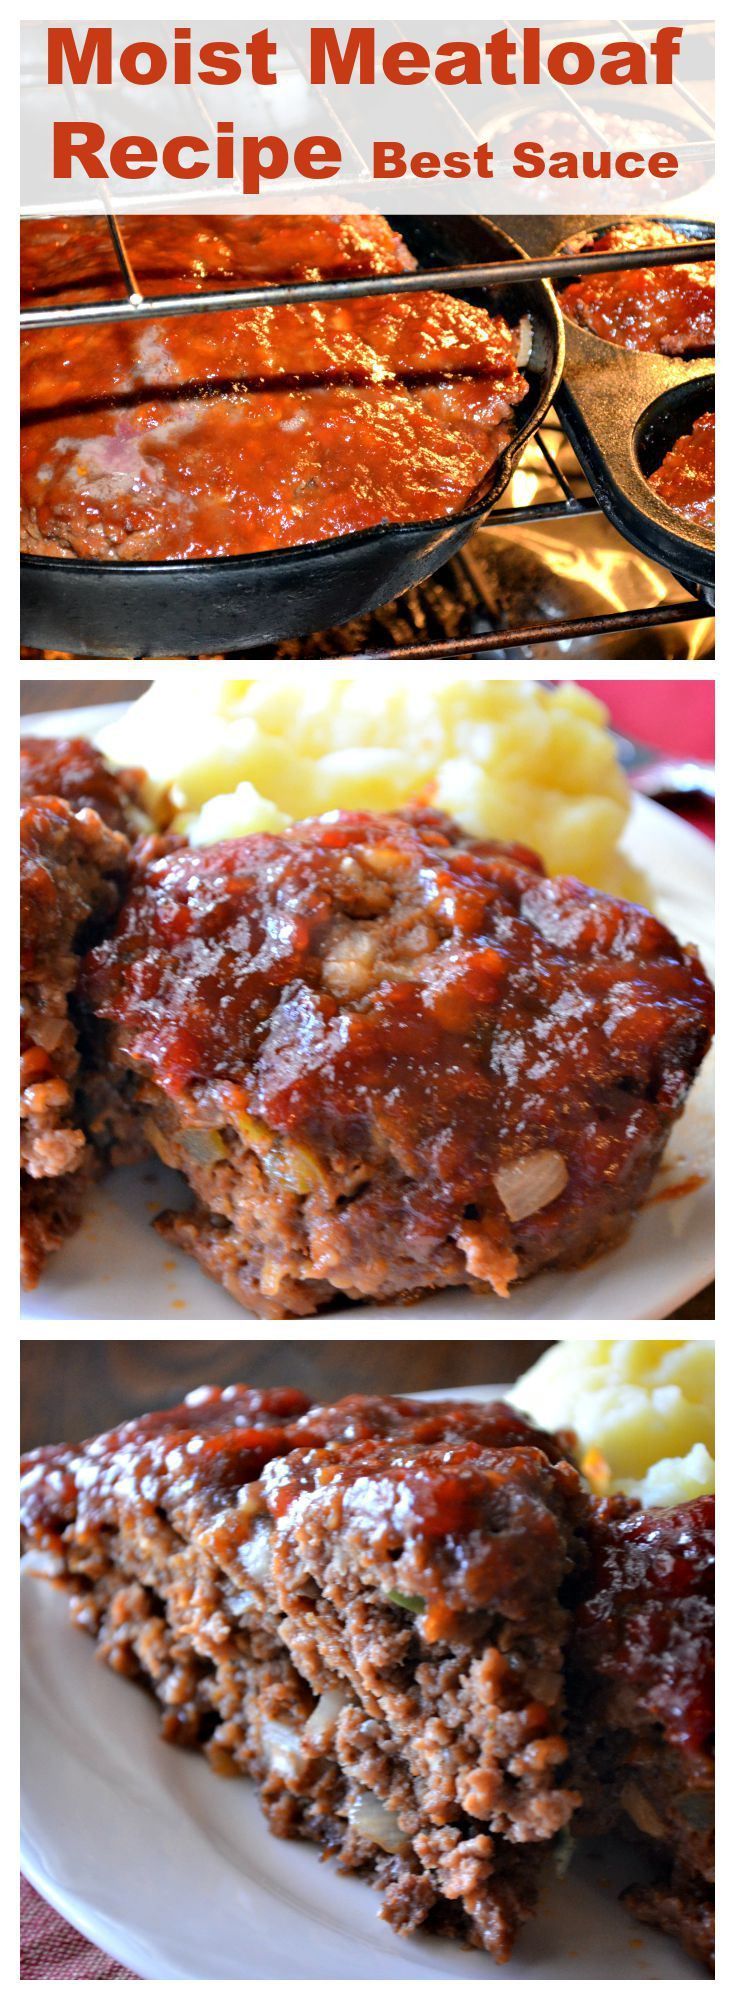 Moist meatloaf every time -   21 southern meatloaf recipes
 ideas